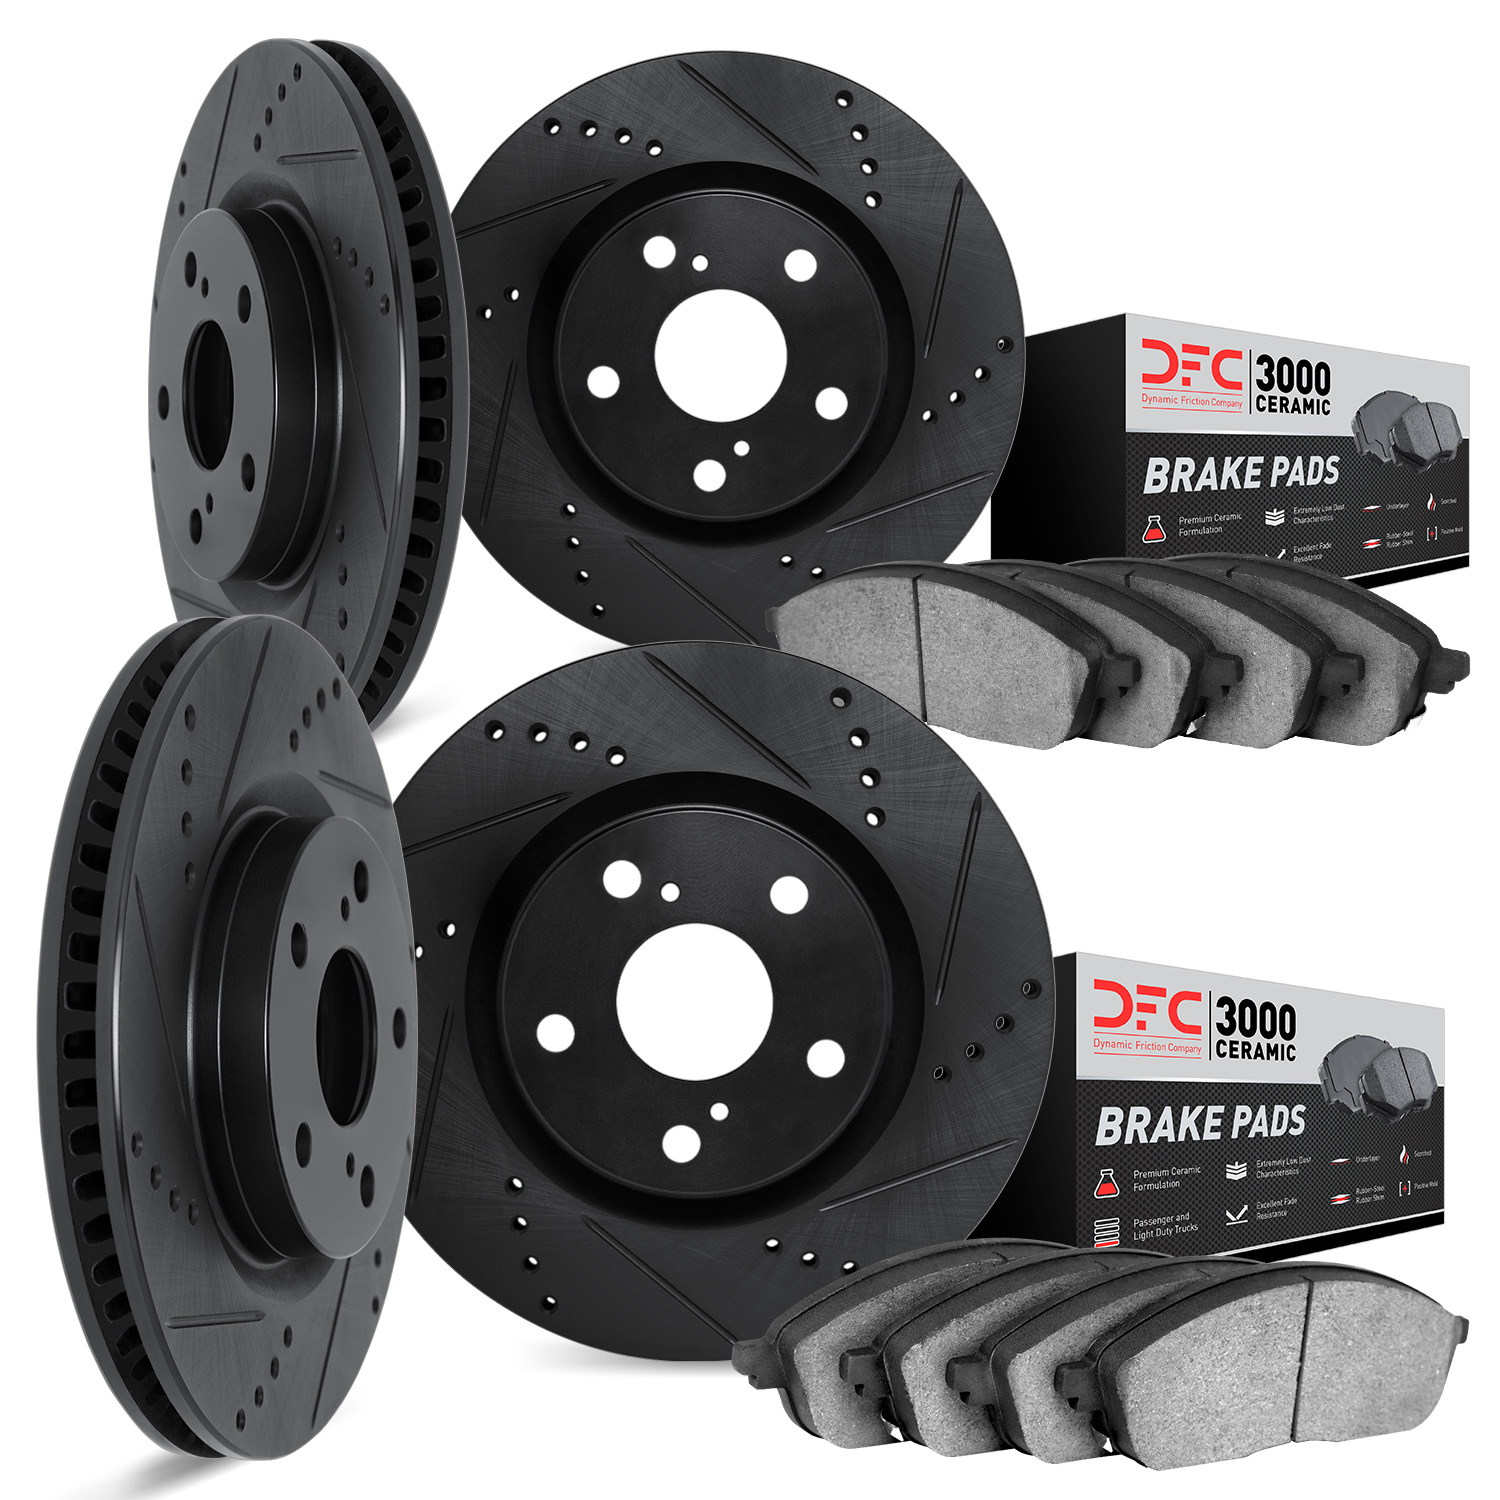 8304-27059 Drilled/Slotted Brake Rotors with 3000-Series Ceramic Brake Pads Kit [Black], 2003-2009 Volvo, Position: Front and Re